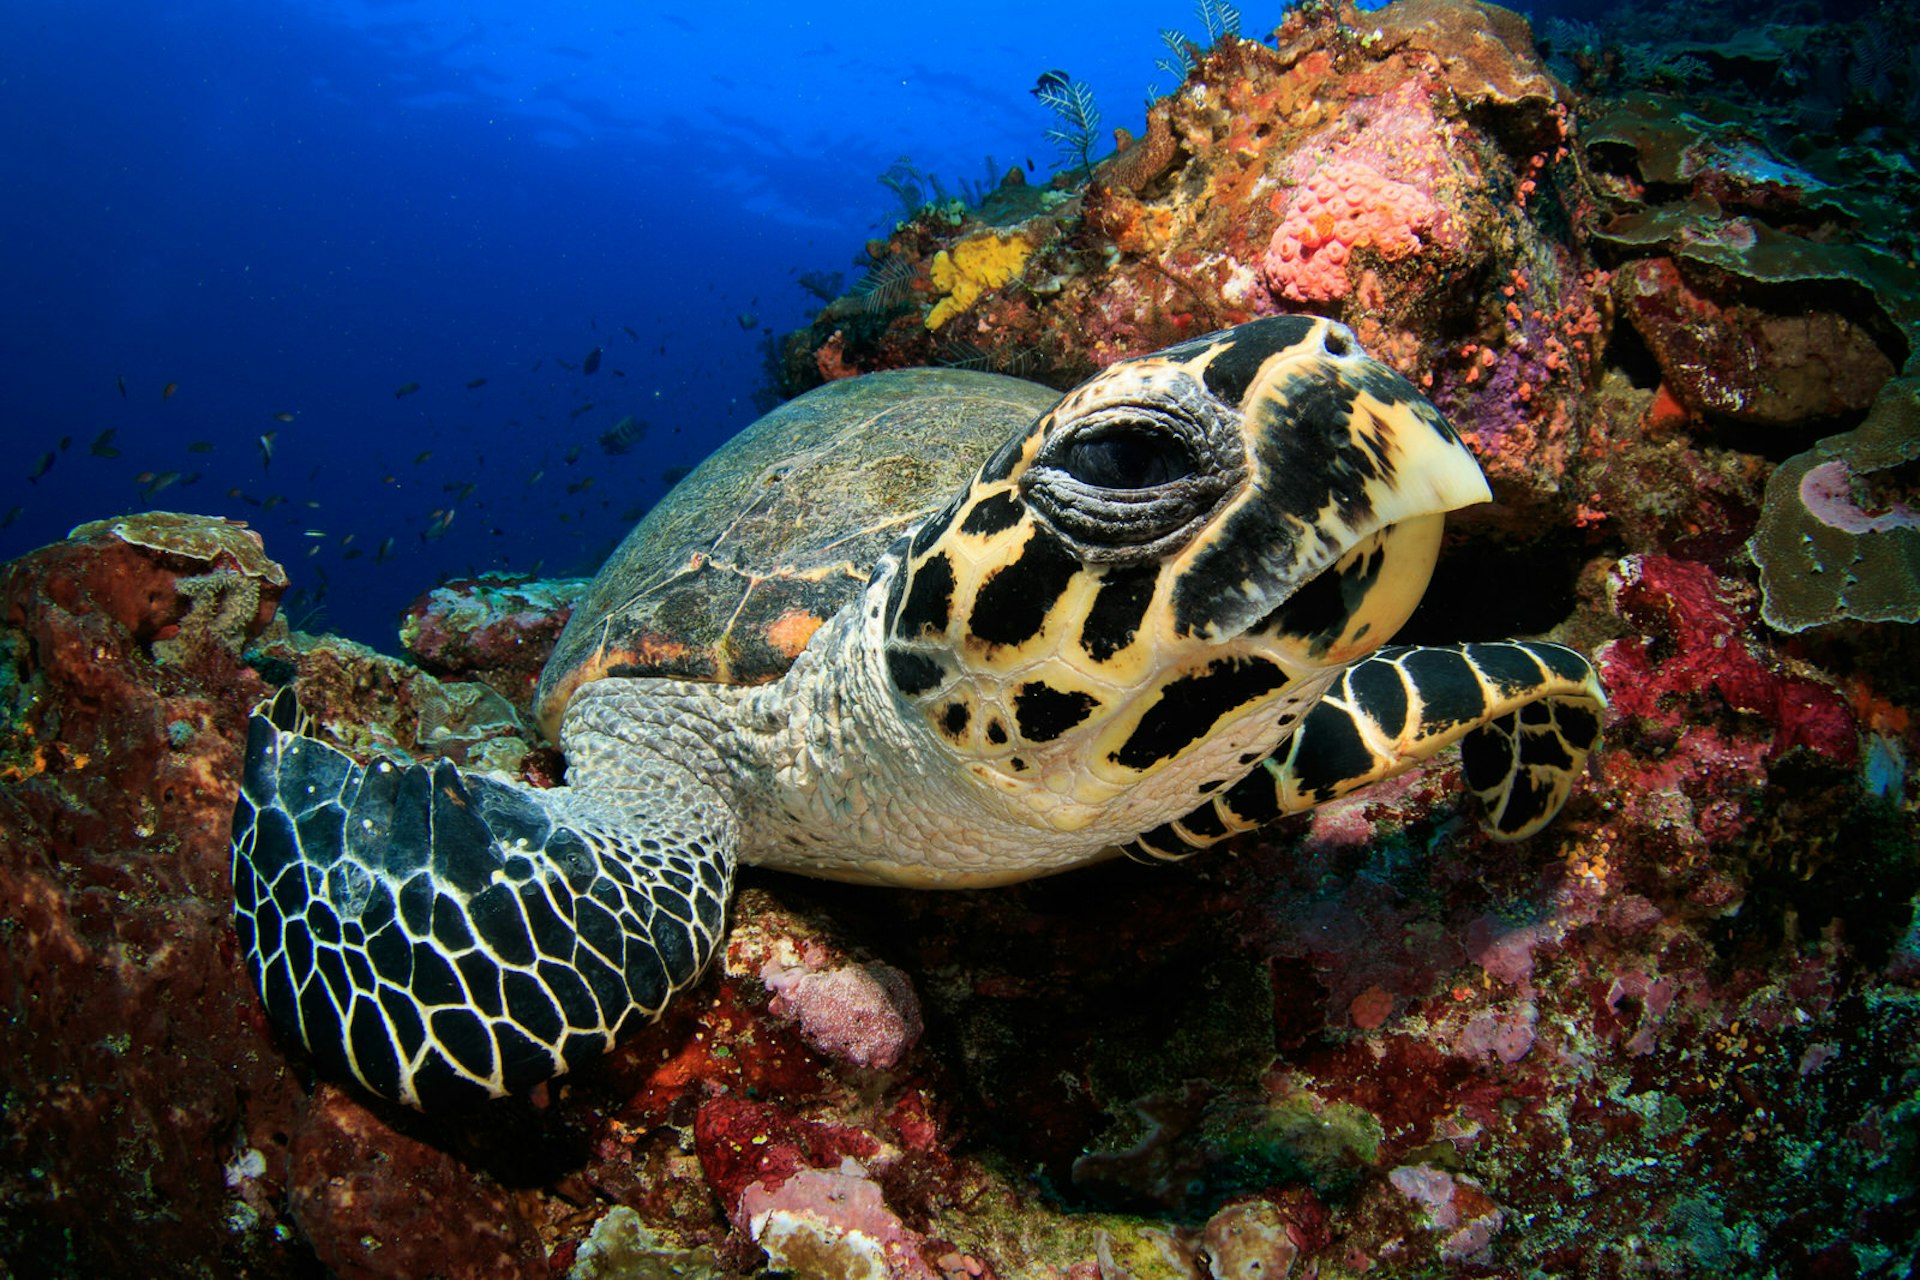 A sea turtle - sporting a somewhat suspicious look - in Komodo National Park © SergeUWPhoto / Shutterstock